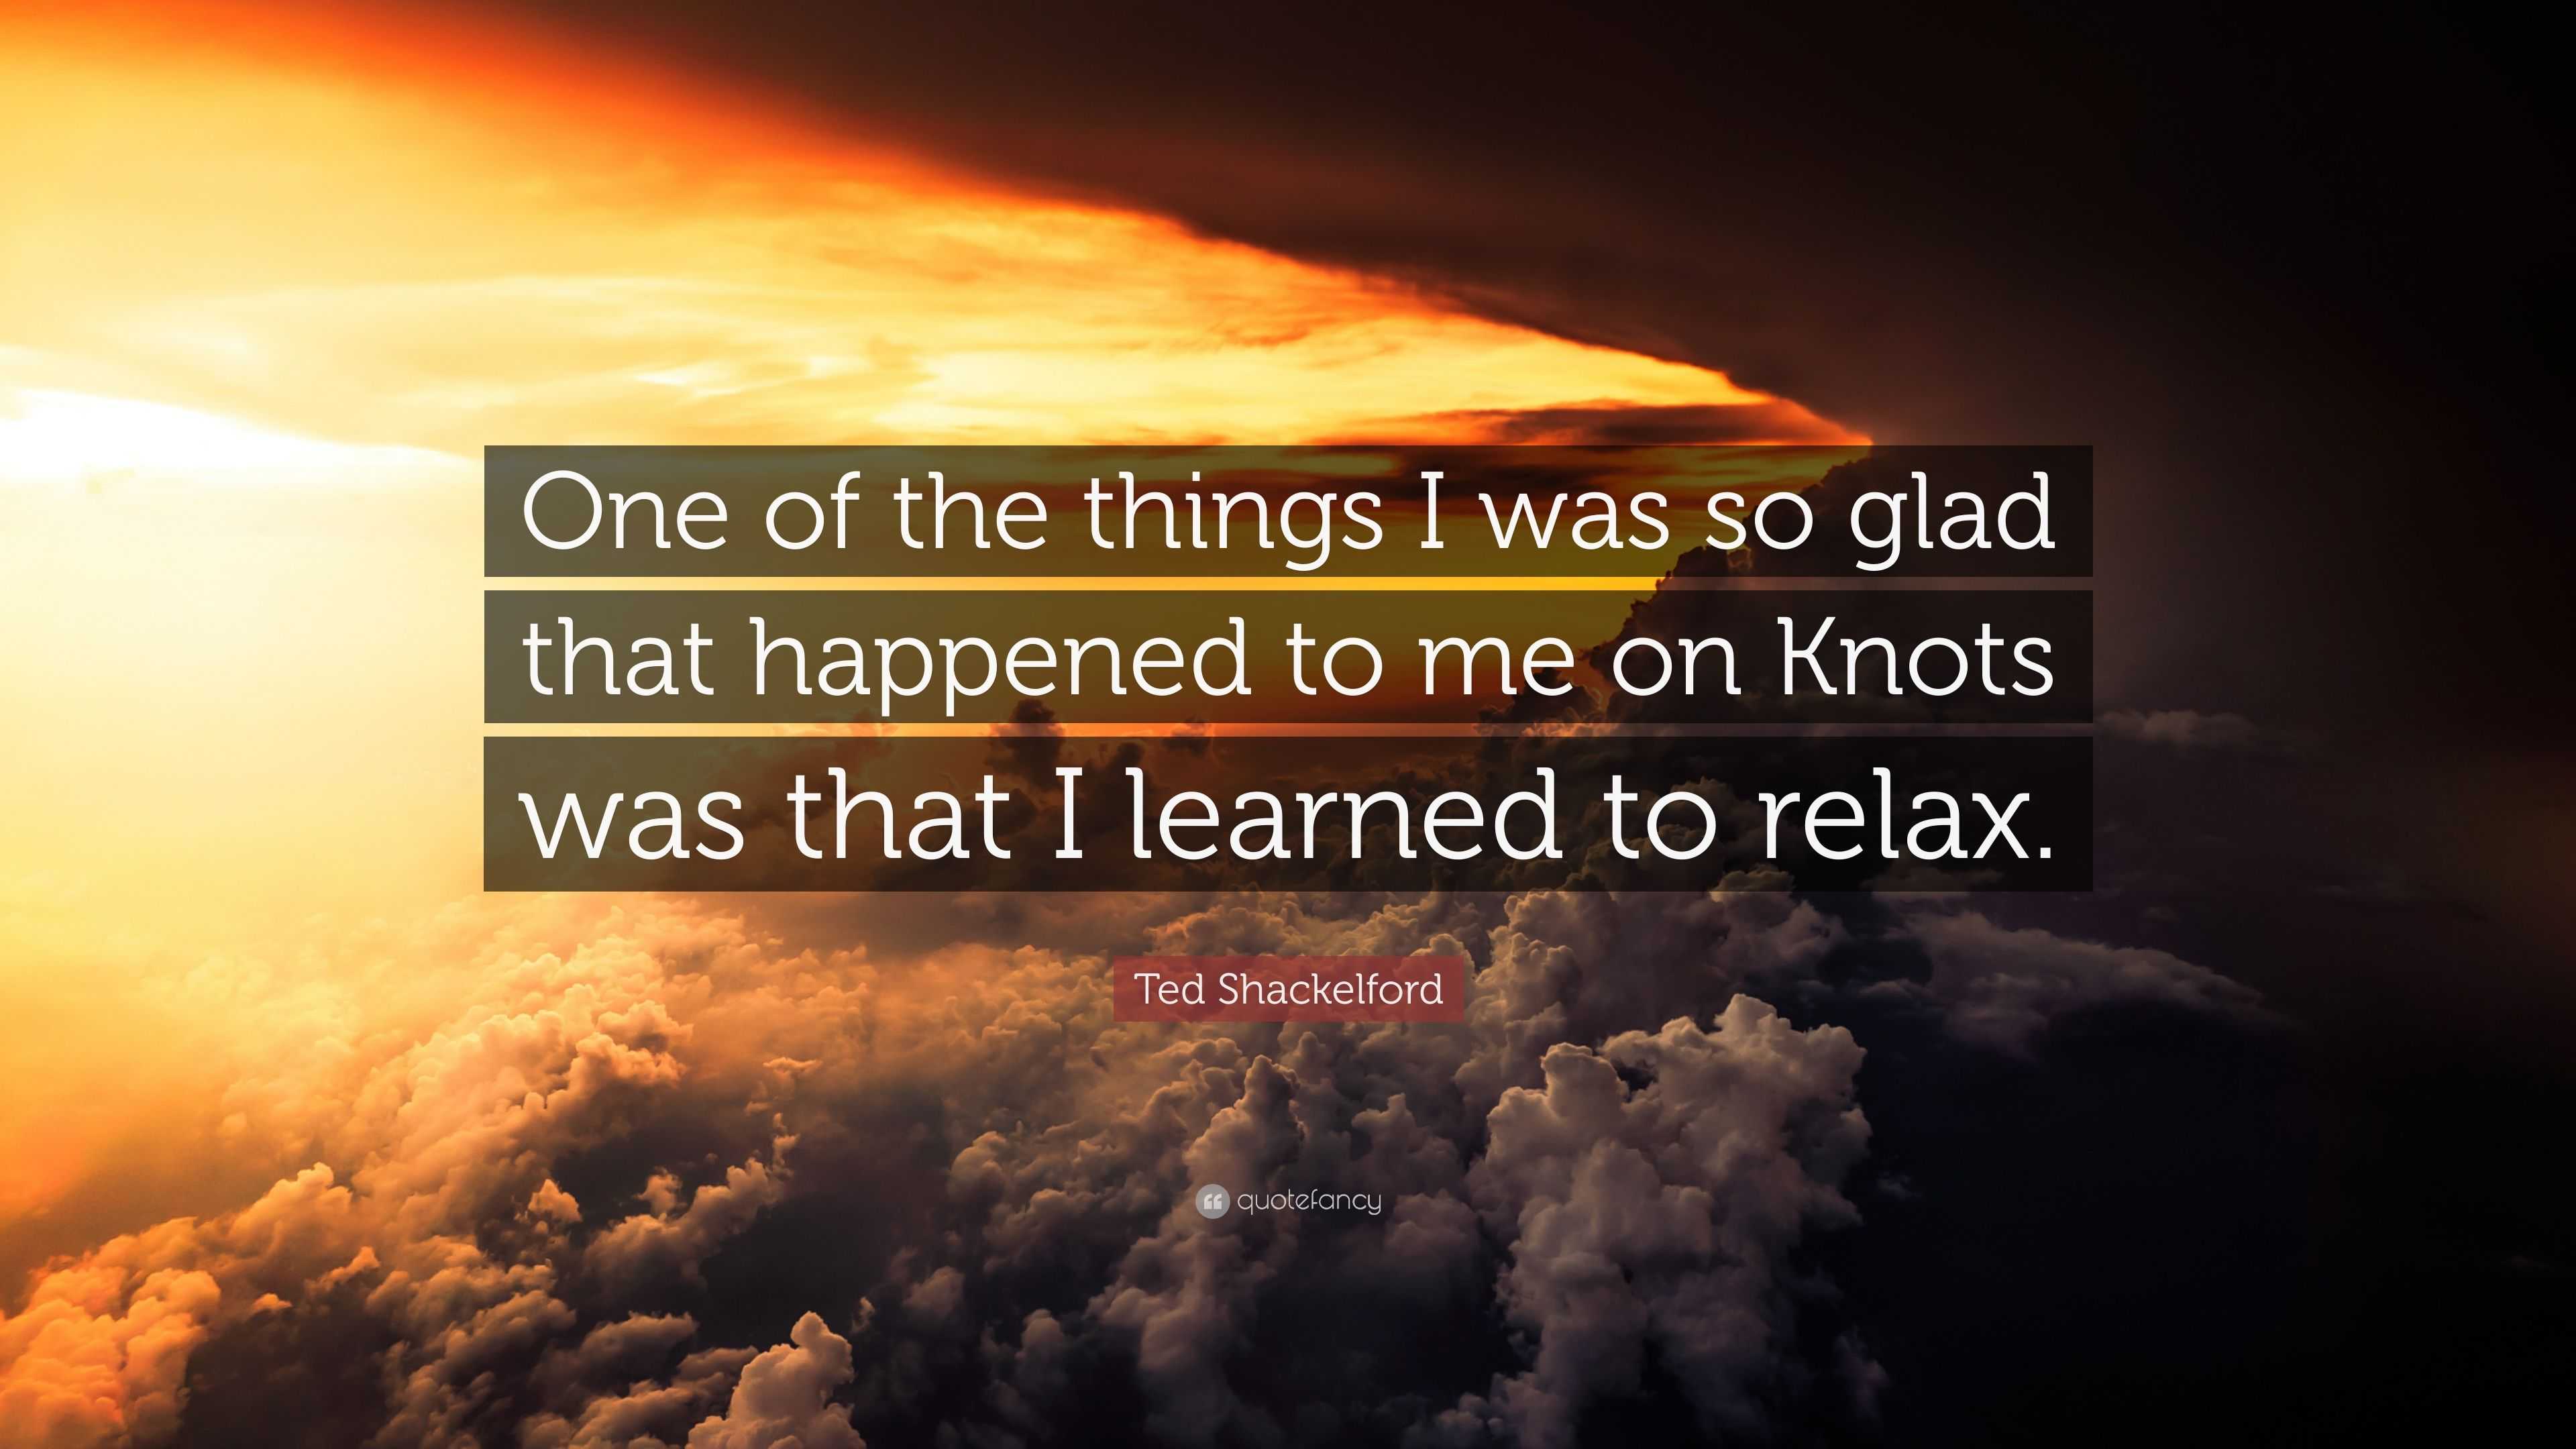 Ted Shackelford Quote: “One of the things I was so glad that happened ...